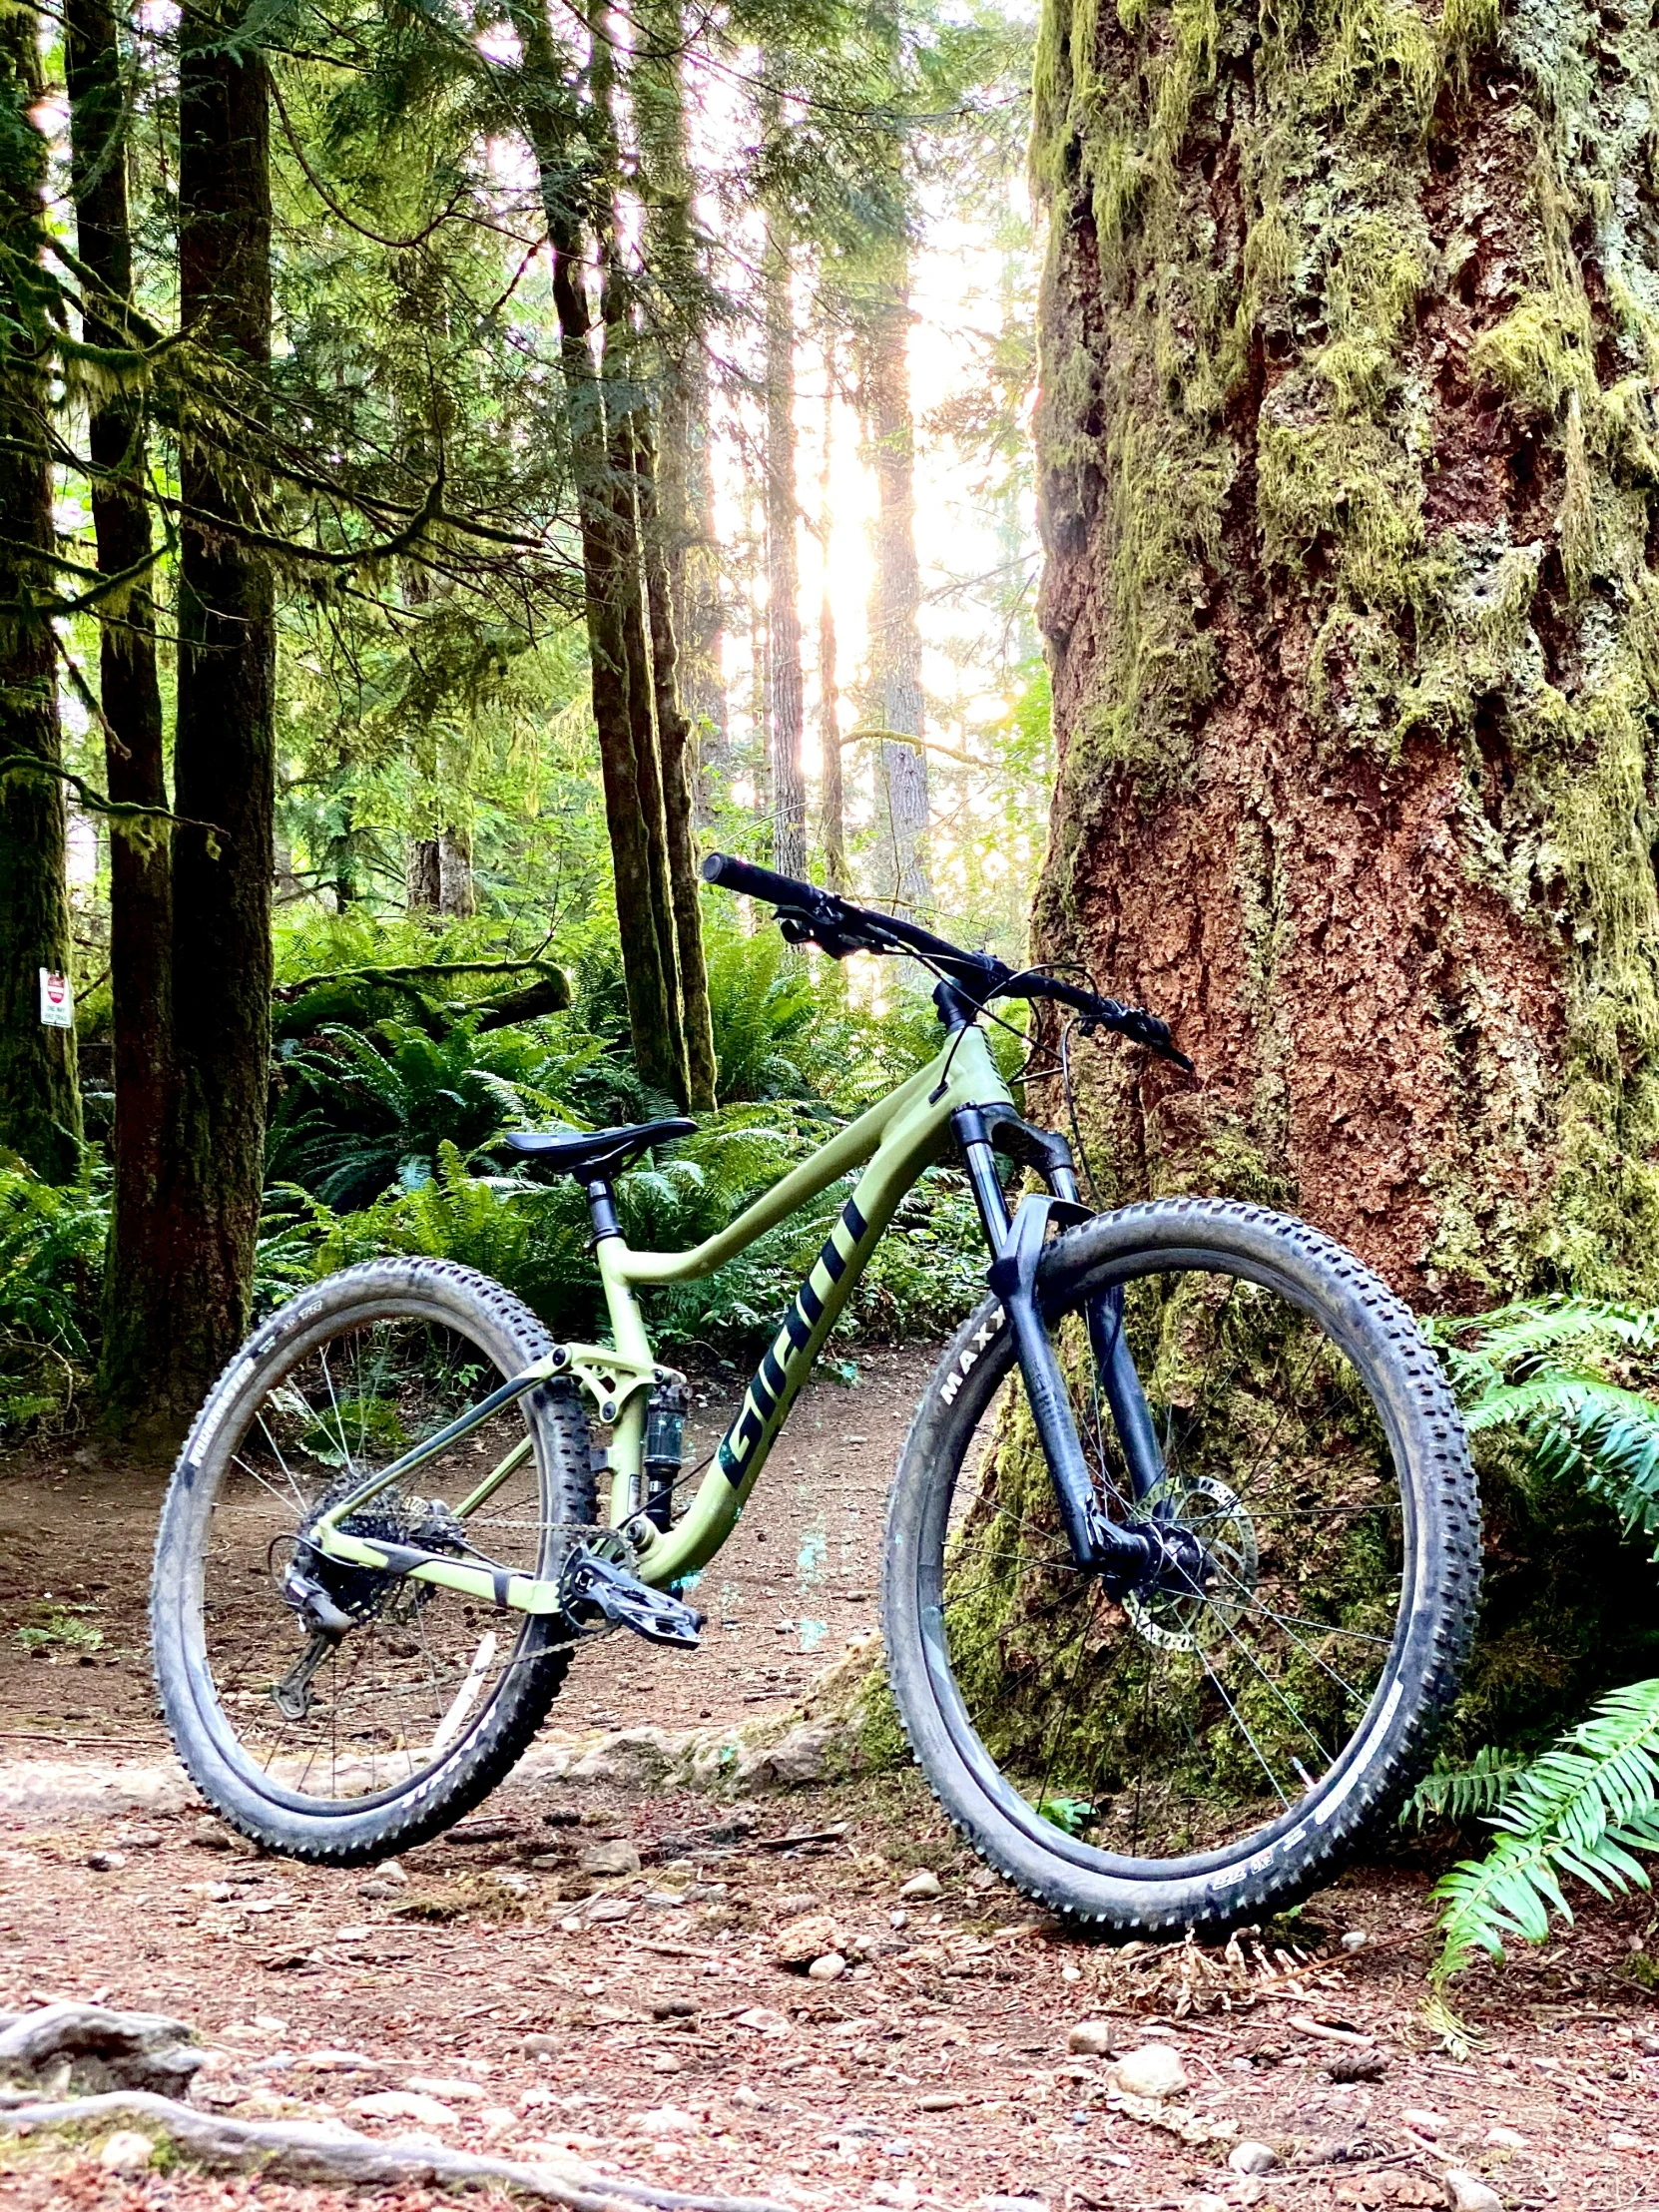 a bike in the middle of the forest next to ferns